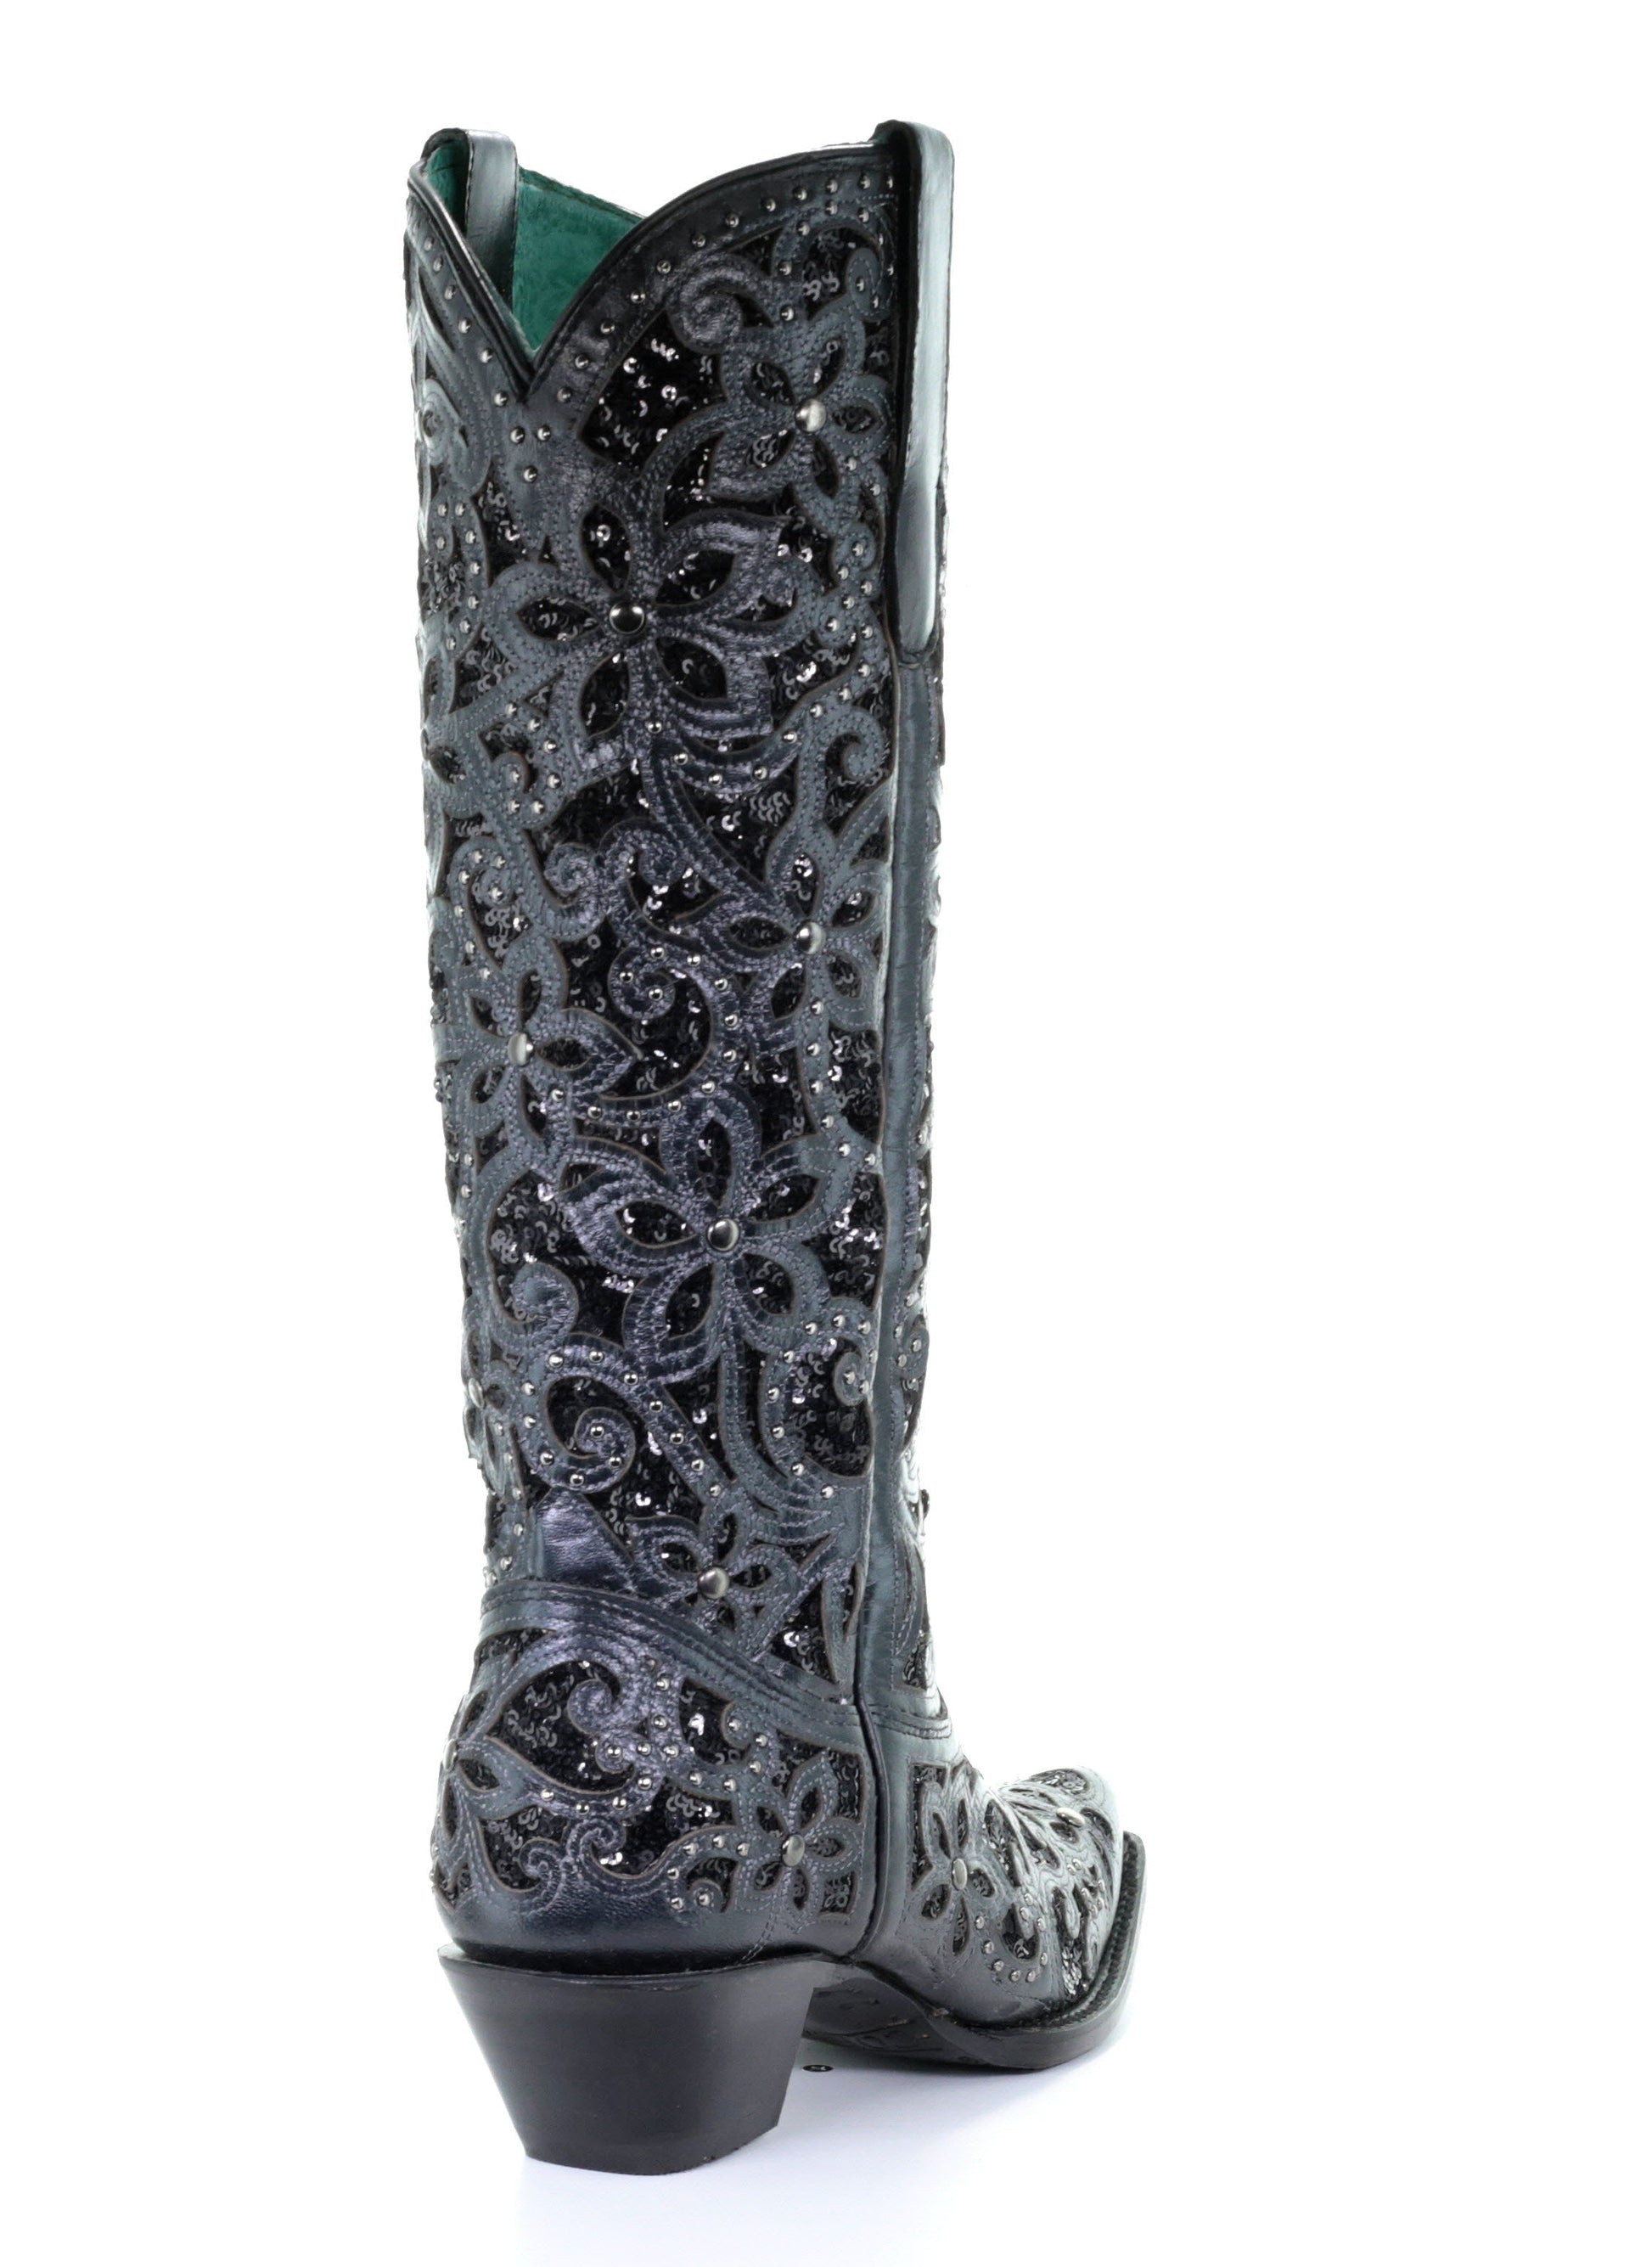 A3589-M BOOT CORRAL BLACK-Kuet